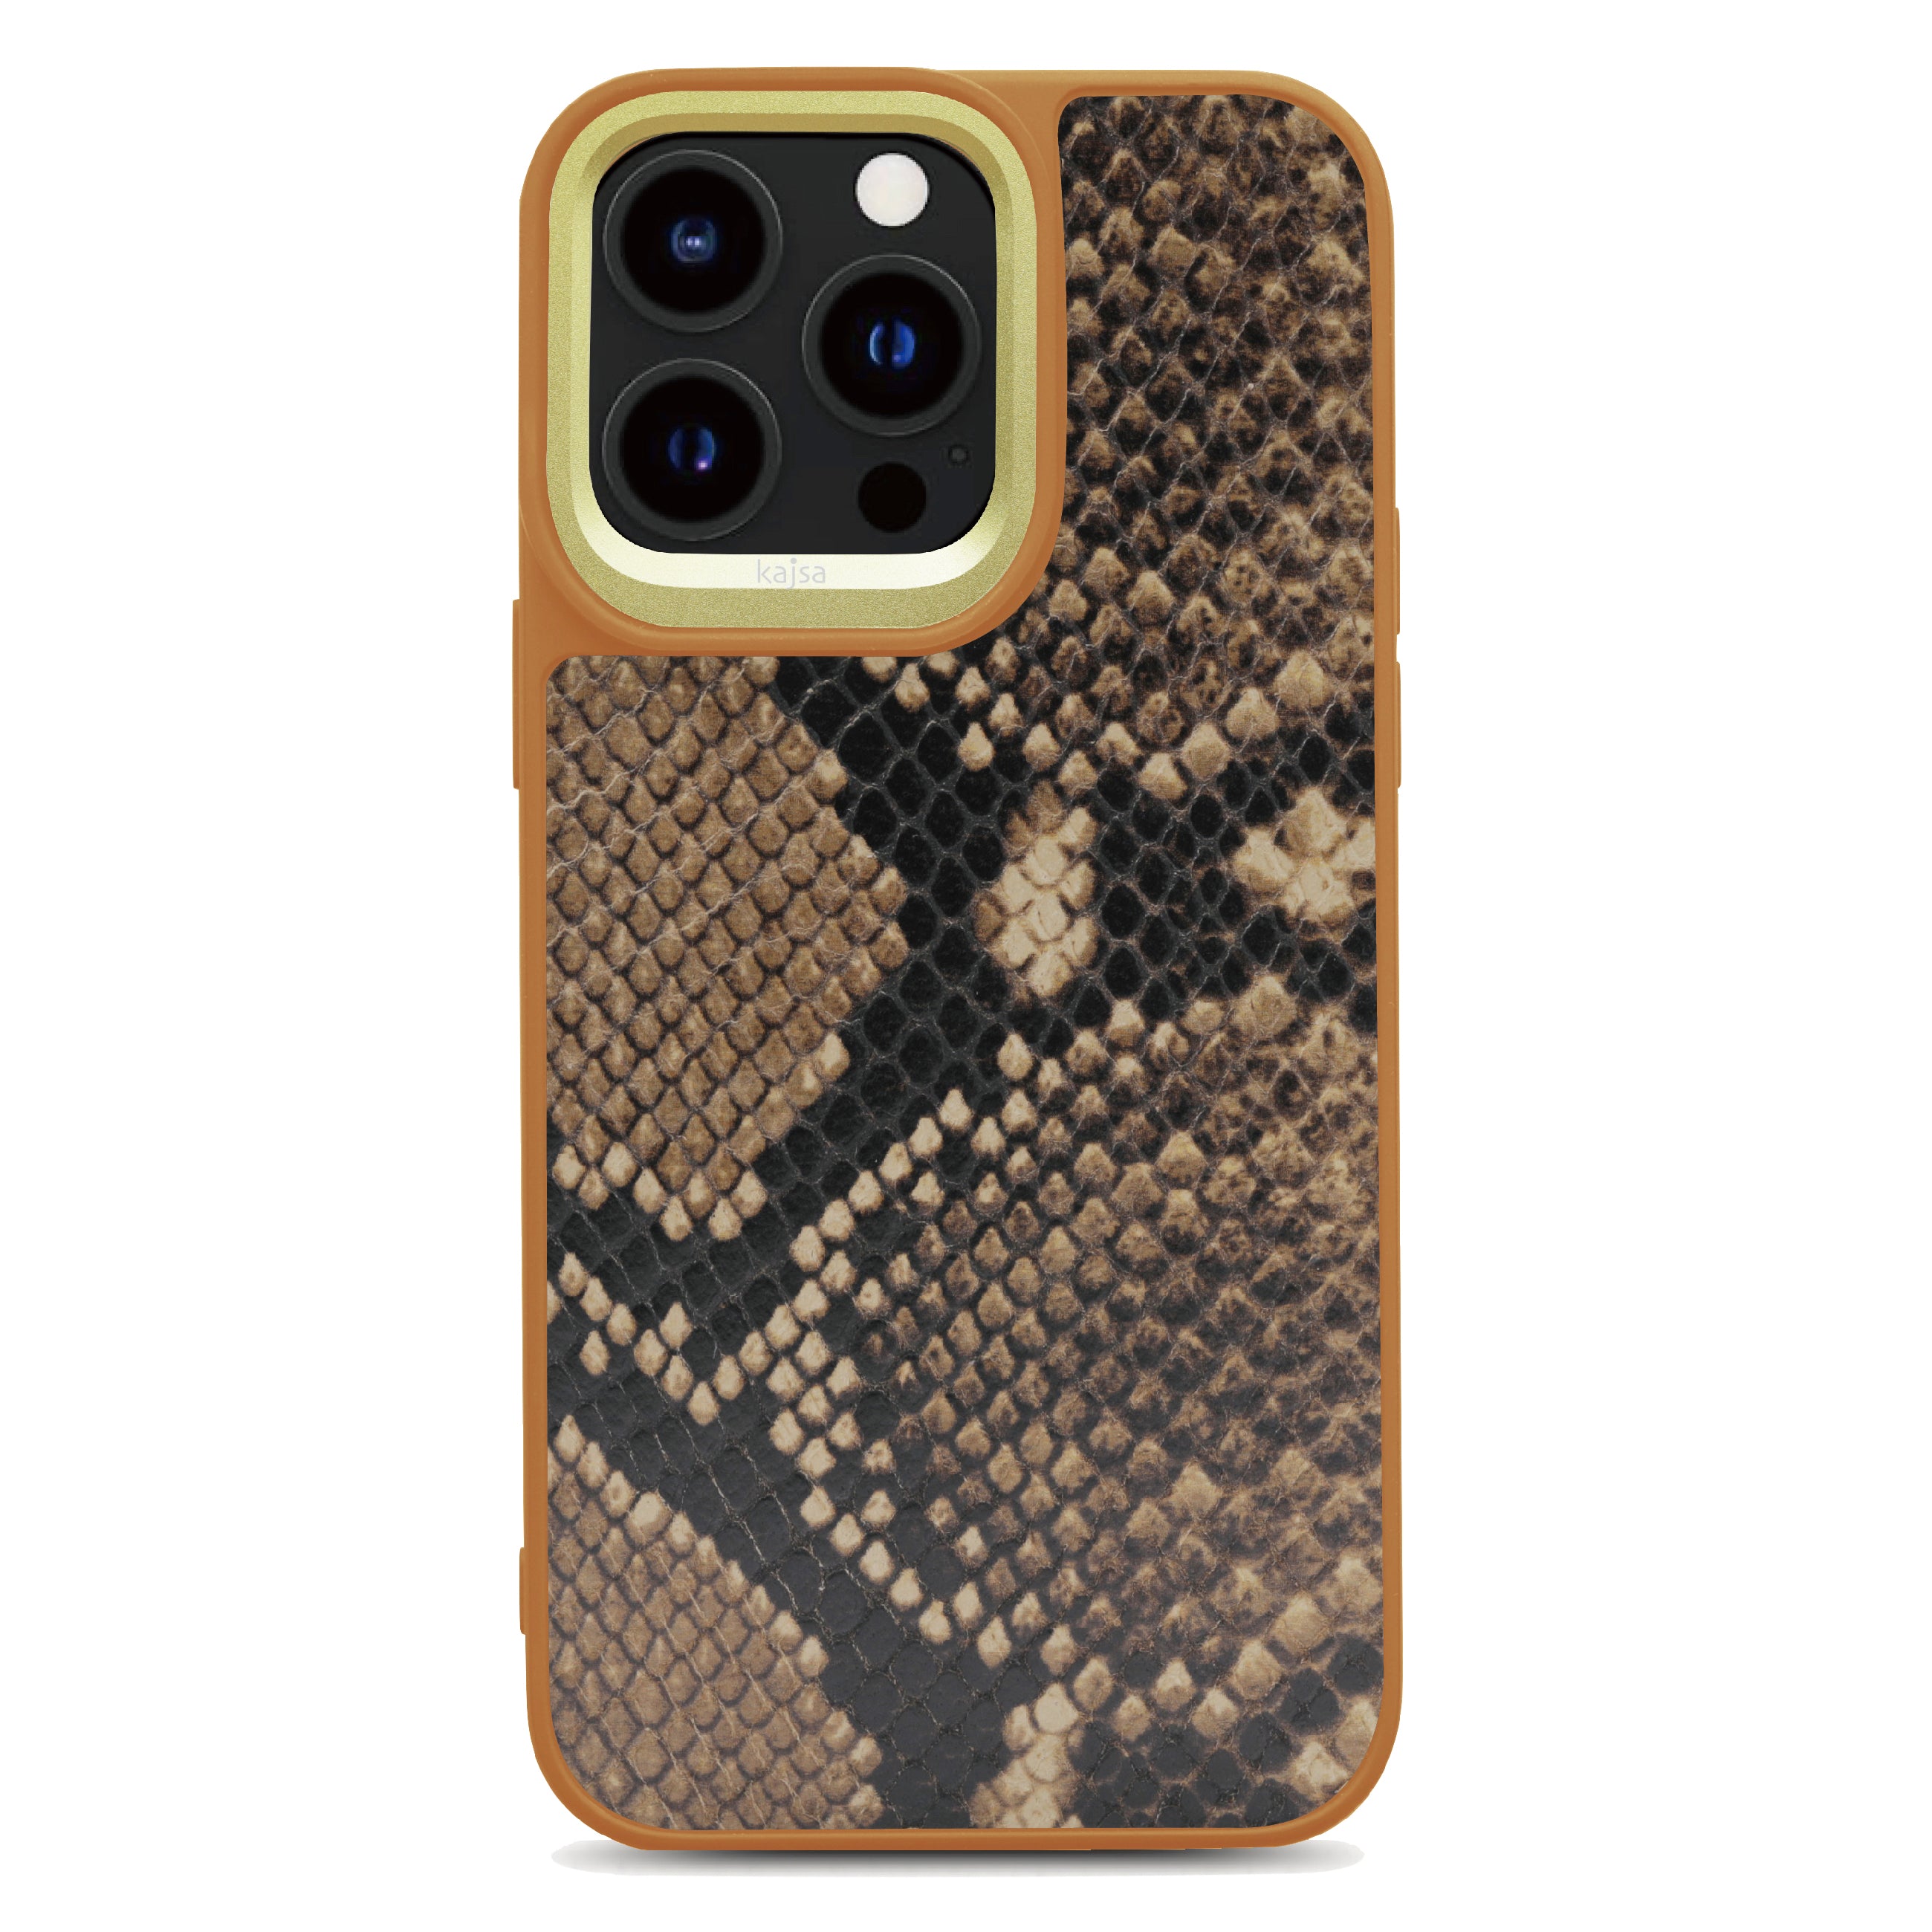 Glamorous Collection - Genuine Leather Snake Pattern Back Case for iPhone 14-Phone Case- phone case - phone cases- phone cover- iphone cover- iphone case- iphone cases- leather case- leather cases- DIYCASE - custom case - leather cover - hand strap case - croco pattern case - snake pattern case - carbon fiber phone case - phone case brand - unique phone case - high quality - phone case brand - protective case - buy phone case hong kong - online buy phone case - iphone‎手機殼 - 客製化手機殼 - samsung ‎手機殼 - 香港手機殼 - 買